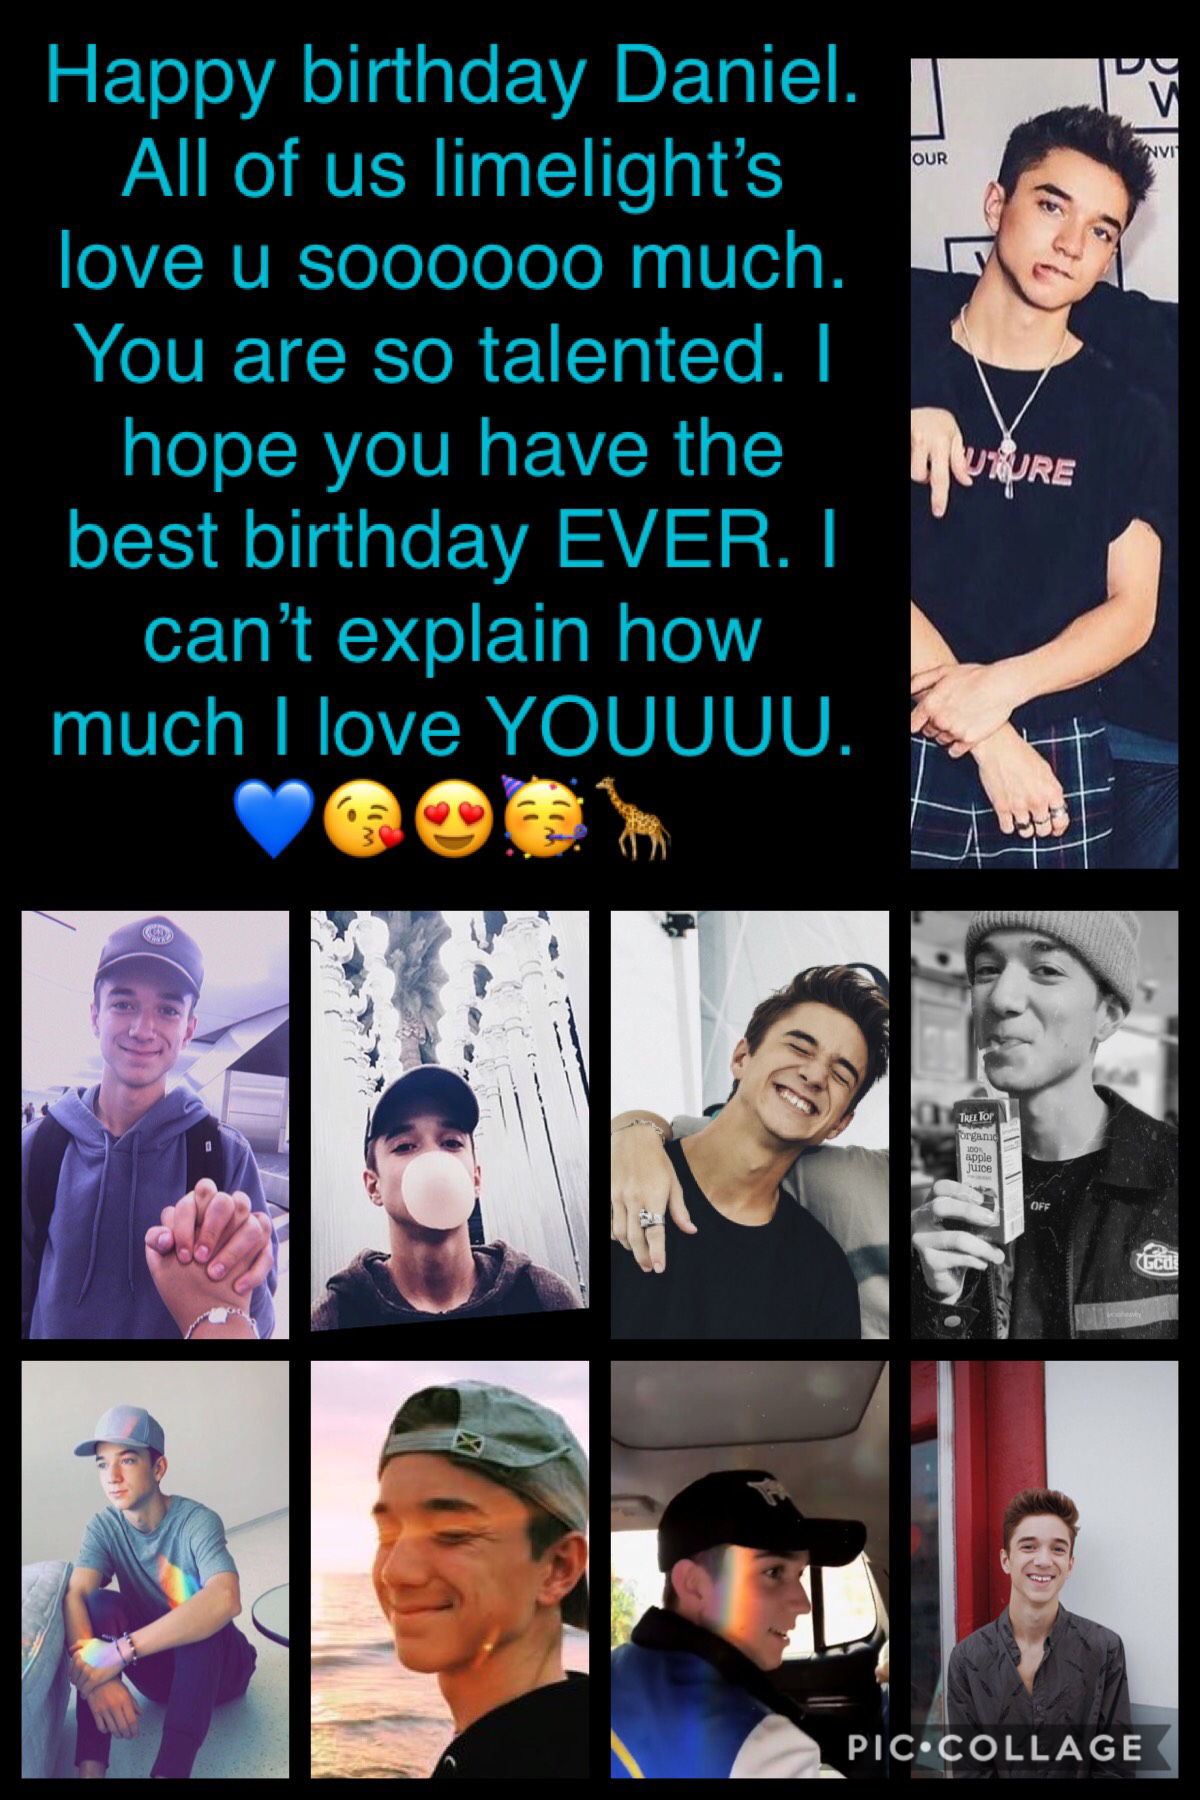 Daniel u r one of the best things in the world and I hope one day I will get to meet u and the rest of the boys. Love u. Have the best birthday-freedom08